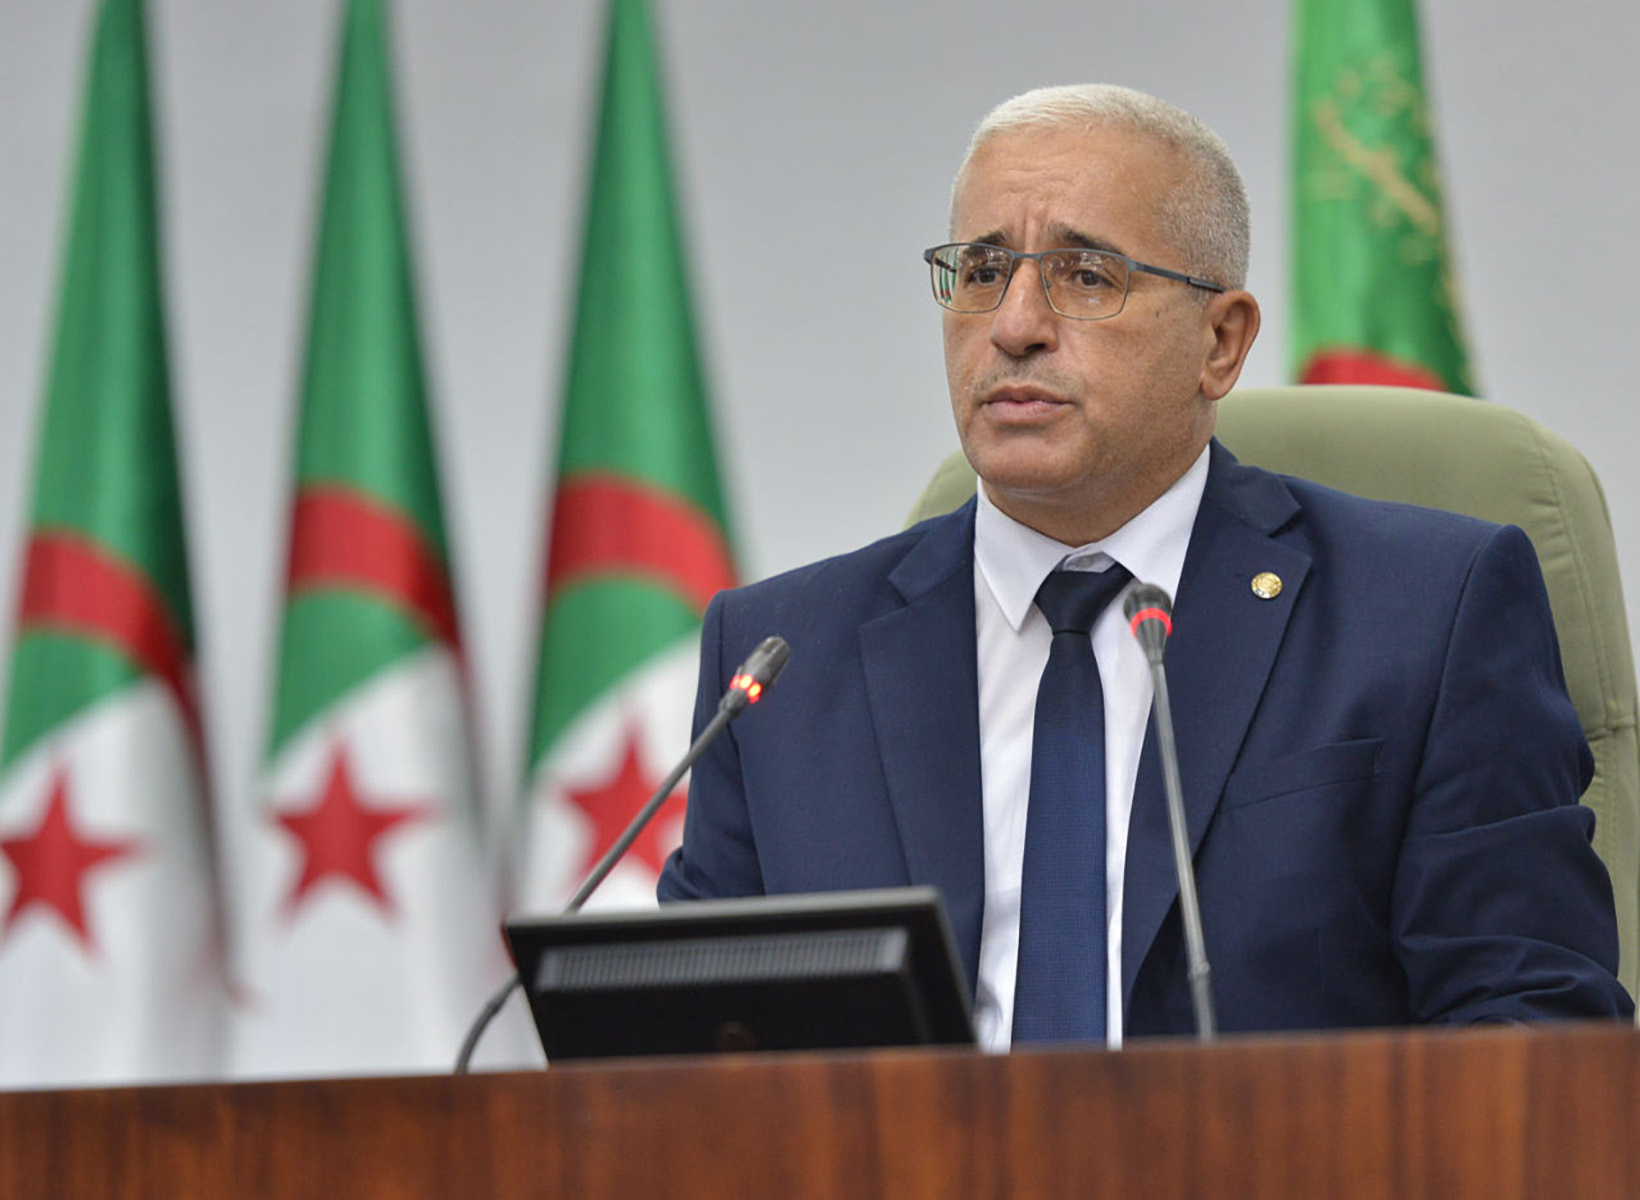 Statement of the PUIC President in Commemoration of the Burning of Al Aqsa Mosque